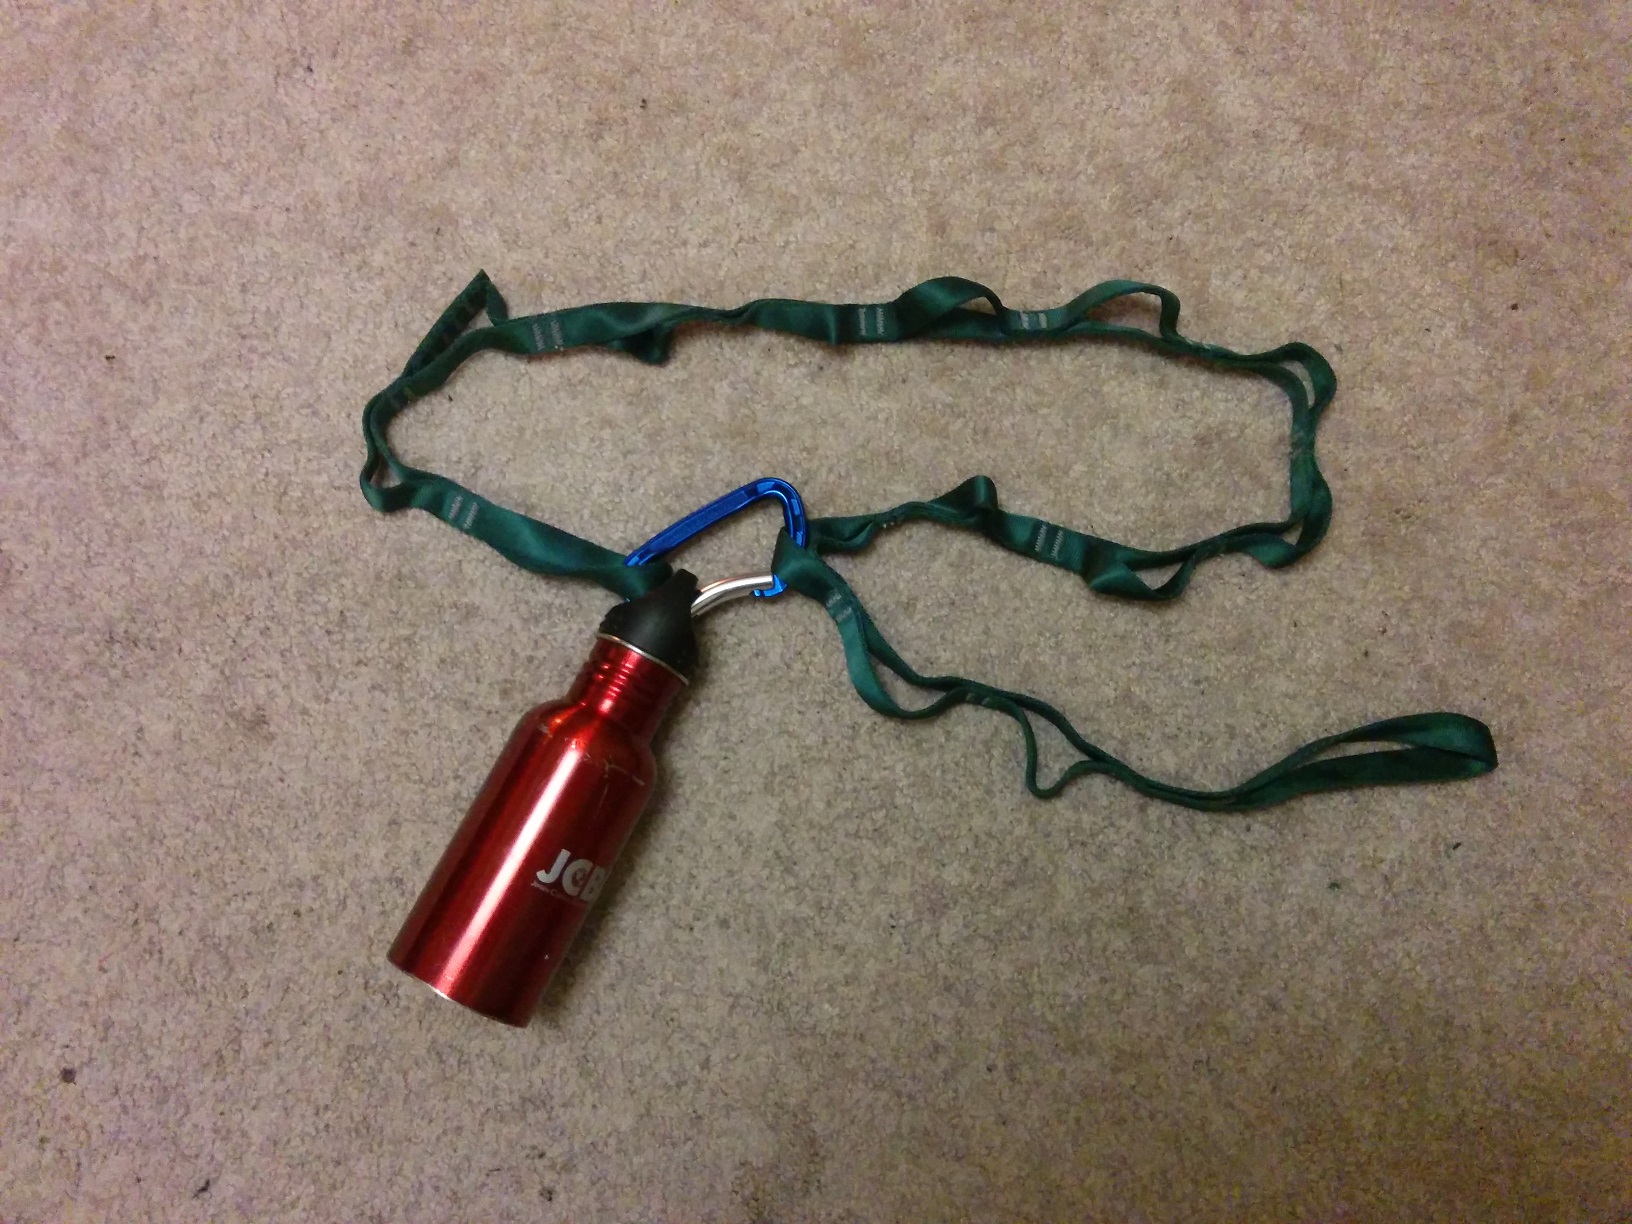 And finally, a metal water bottle on a third daisy chain, green this time, sitting on the carpet.